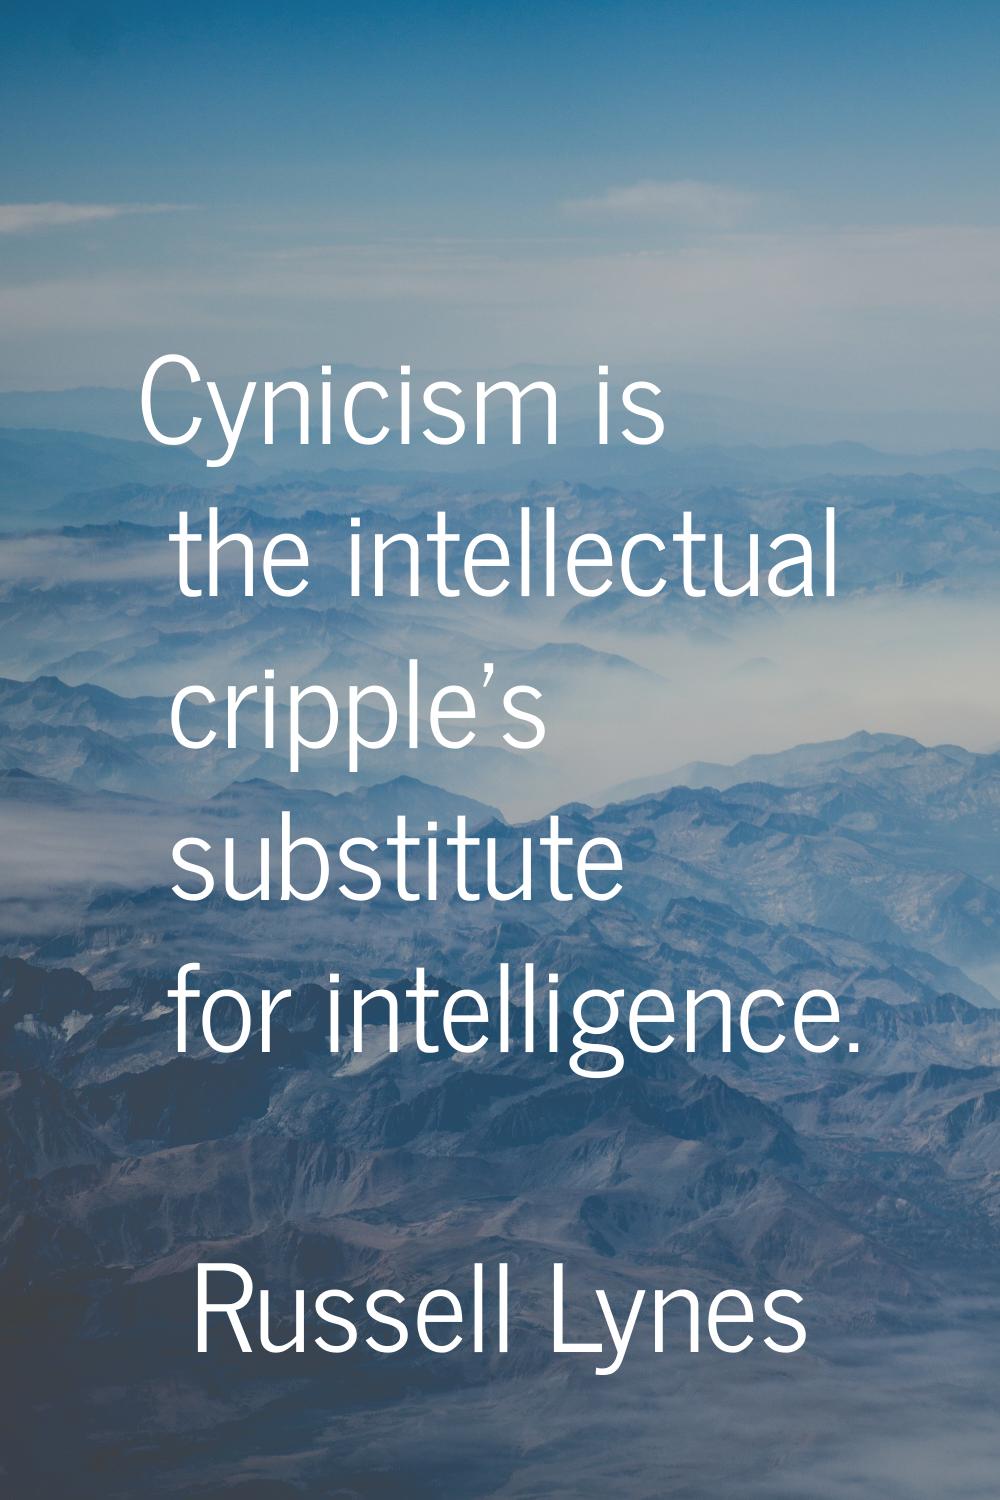 Cynicism is the intellectual cripple's substitute for intelligence.